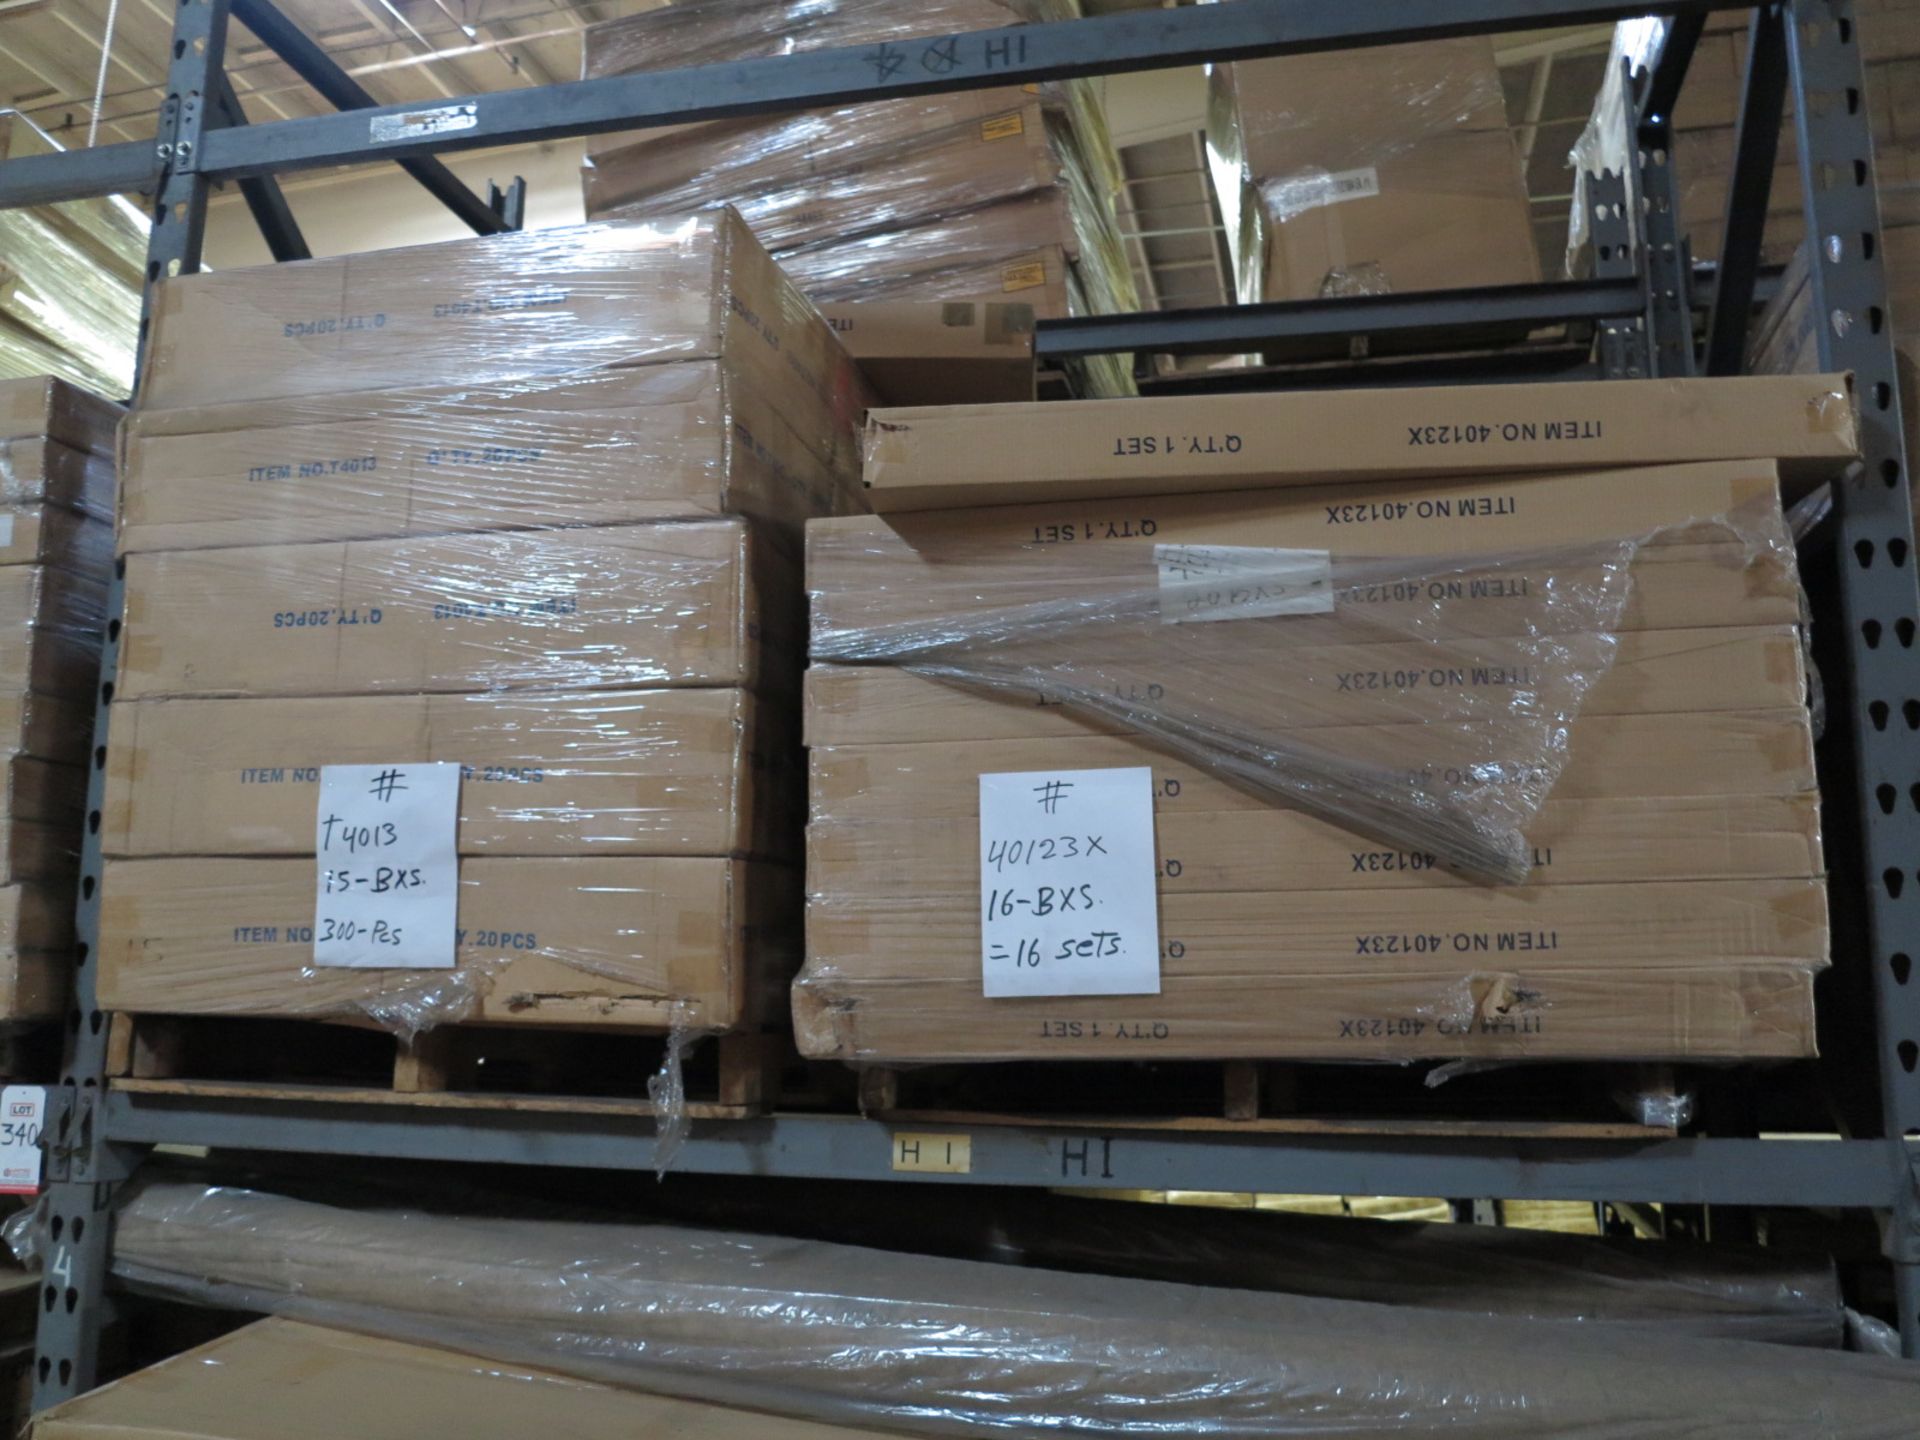 LOT - CONTENTS OF (2) SECTIONS OF PALLET RACK TO INCLUDE: ITEM # 40123, 4 WAY RACK W (4) 18" STR. - Image 5 of 6